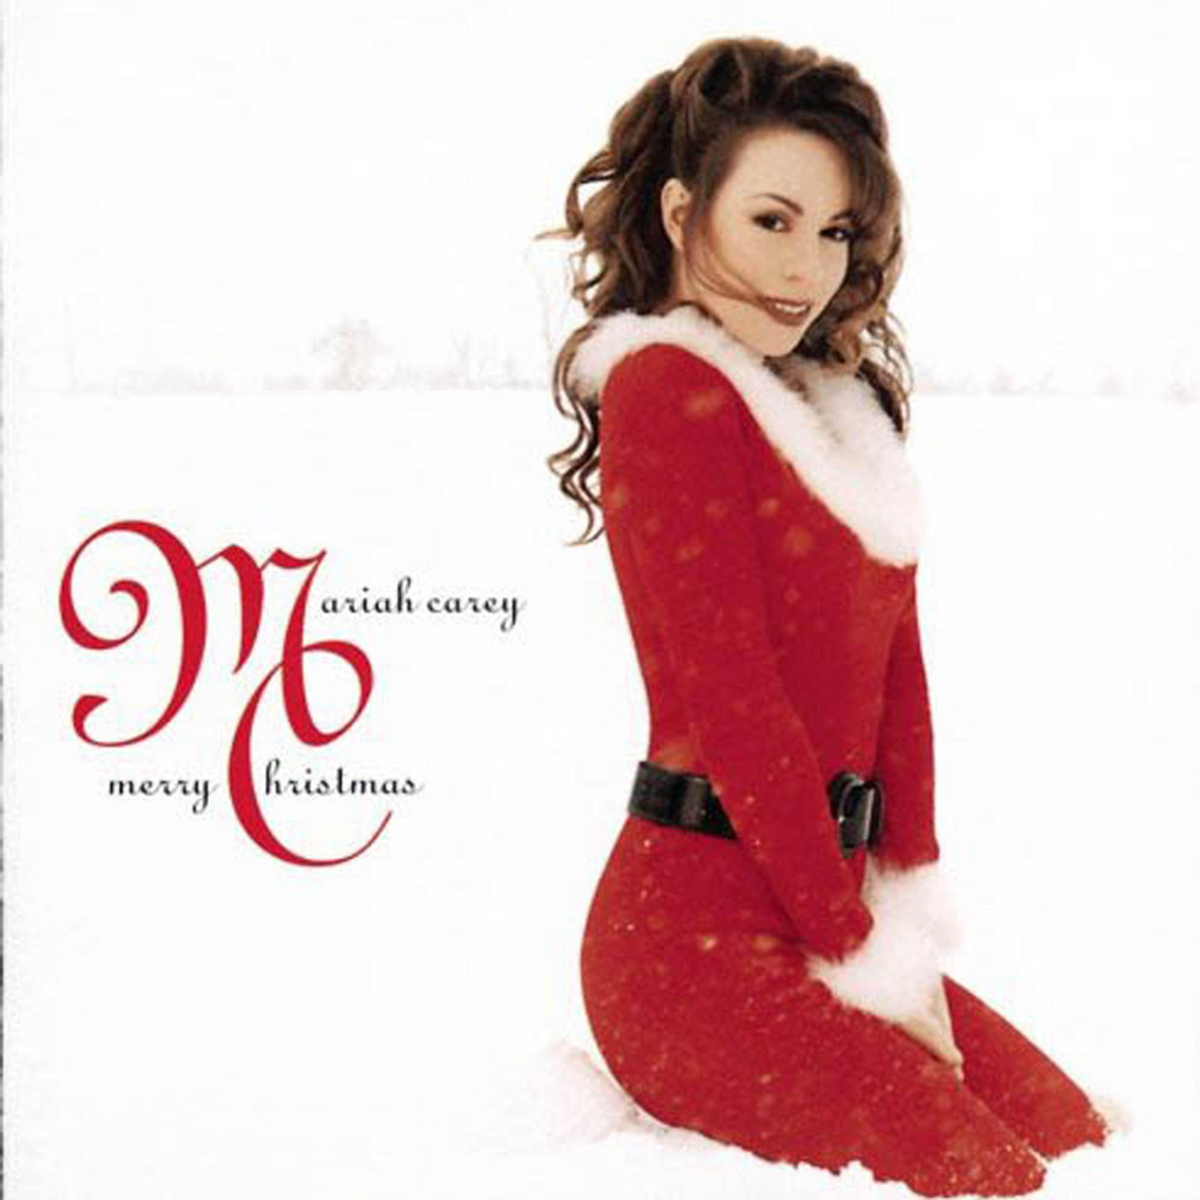 Holiday Classics You Should Listen to this Christmas